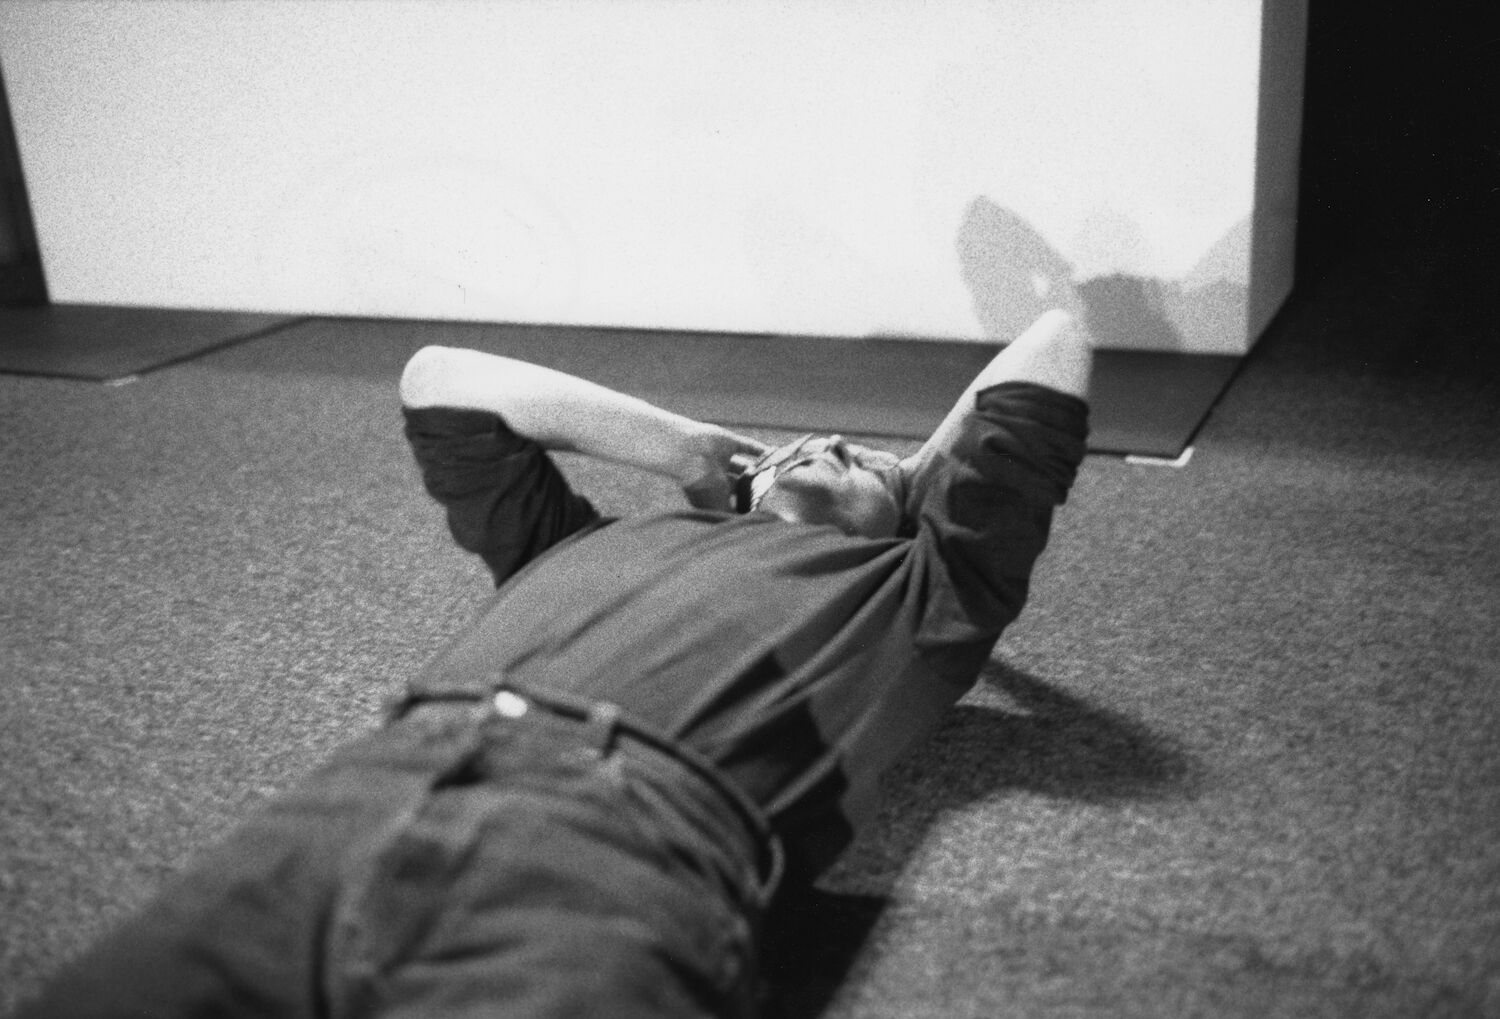 Steve lies on his back on a carpeted floor, talking on a cellphone and looking at the ceiling with his hand on his head.